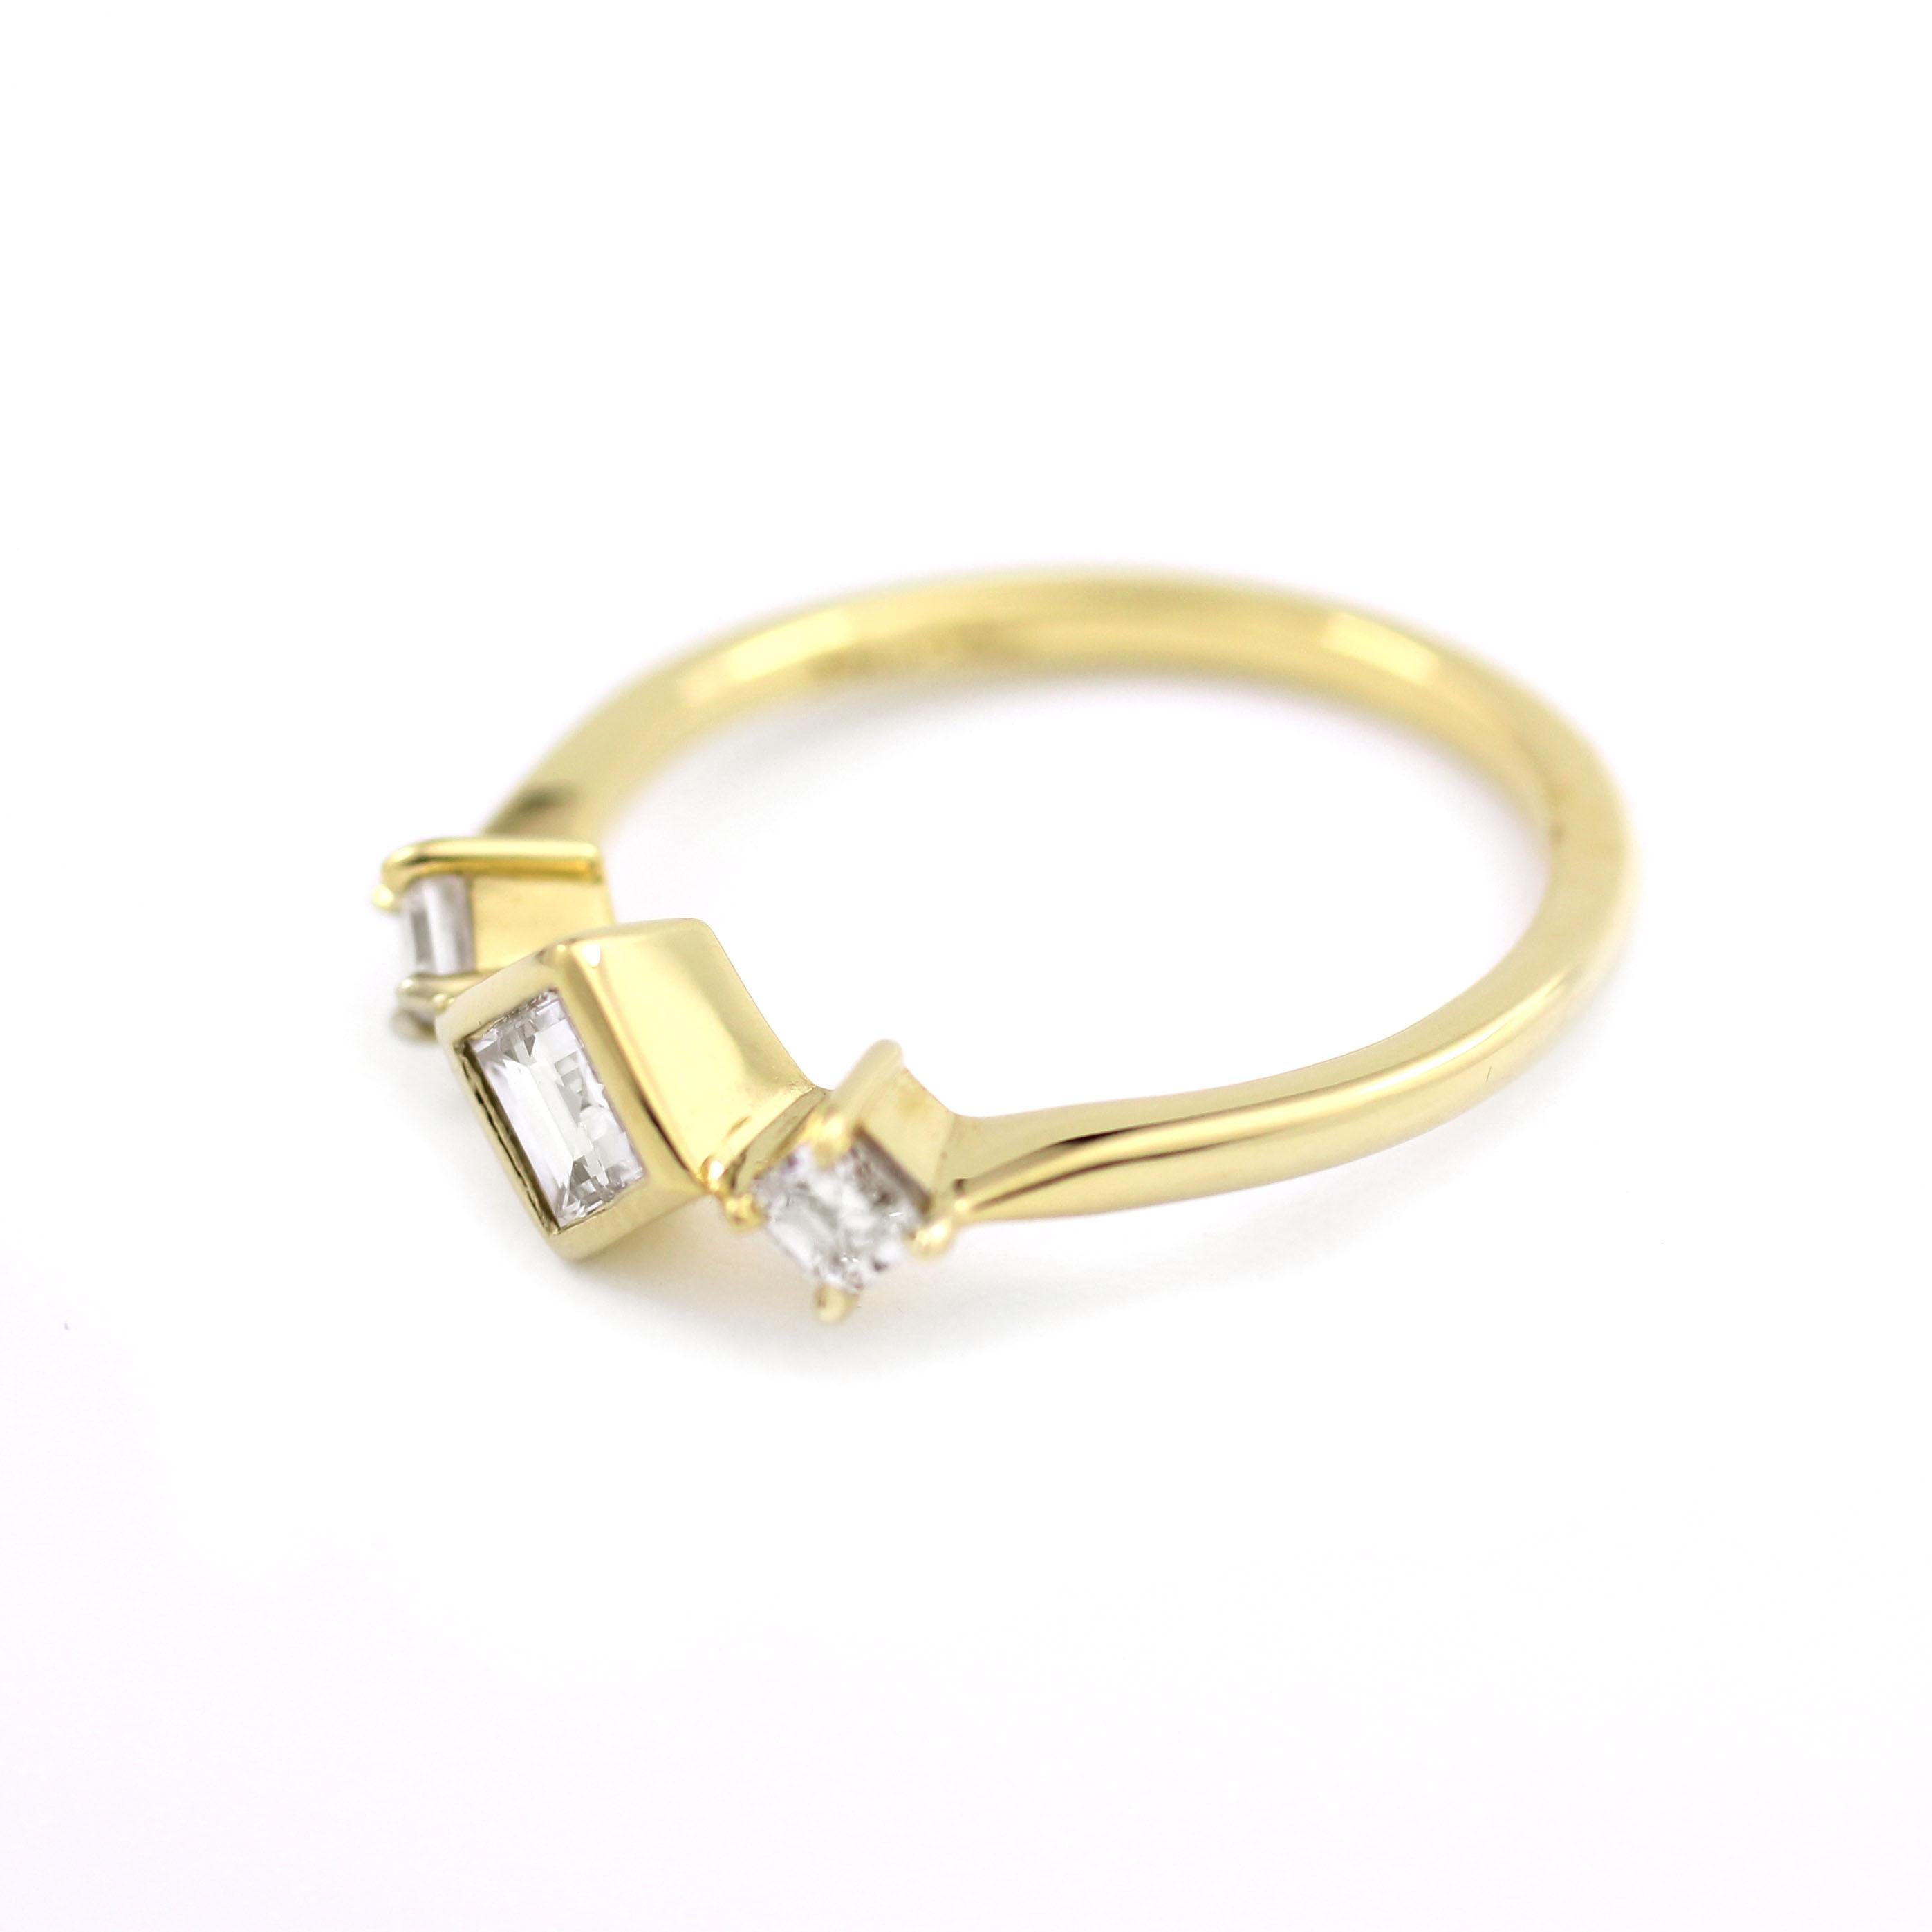 This unique, 18 Kt Gold ring contains one Square-cut Diamond (.30 Cts.) bezel set on the diagonal and flanked by two prong-set Princess Cut Diamonds (.22 Cts.).  A one-of-a-kind ring in an appealing modern style setting.   

Size 6 1/2 for immediate